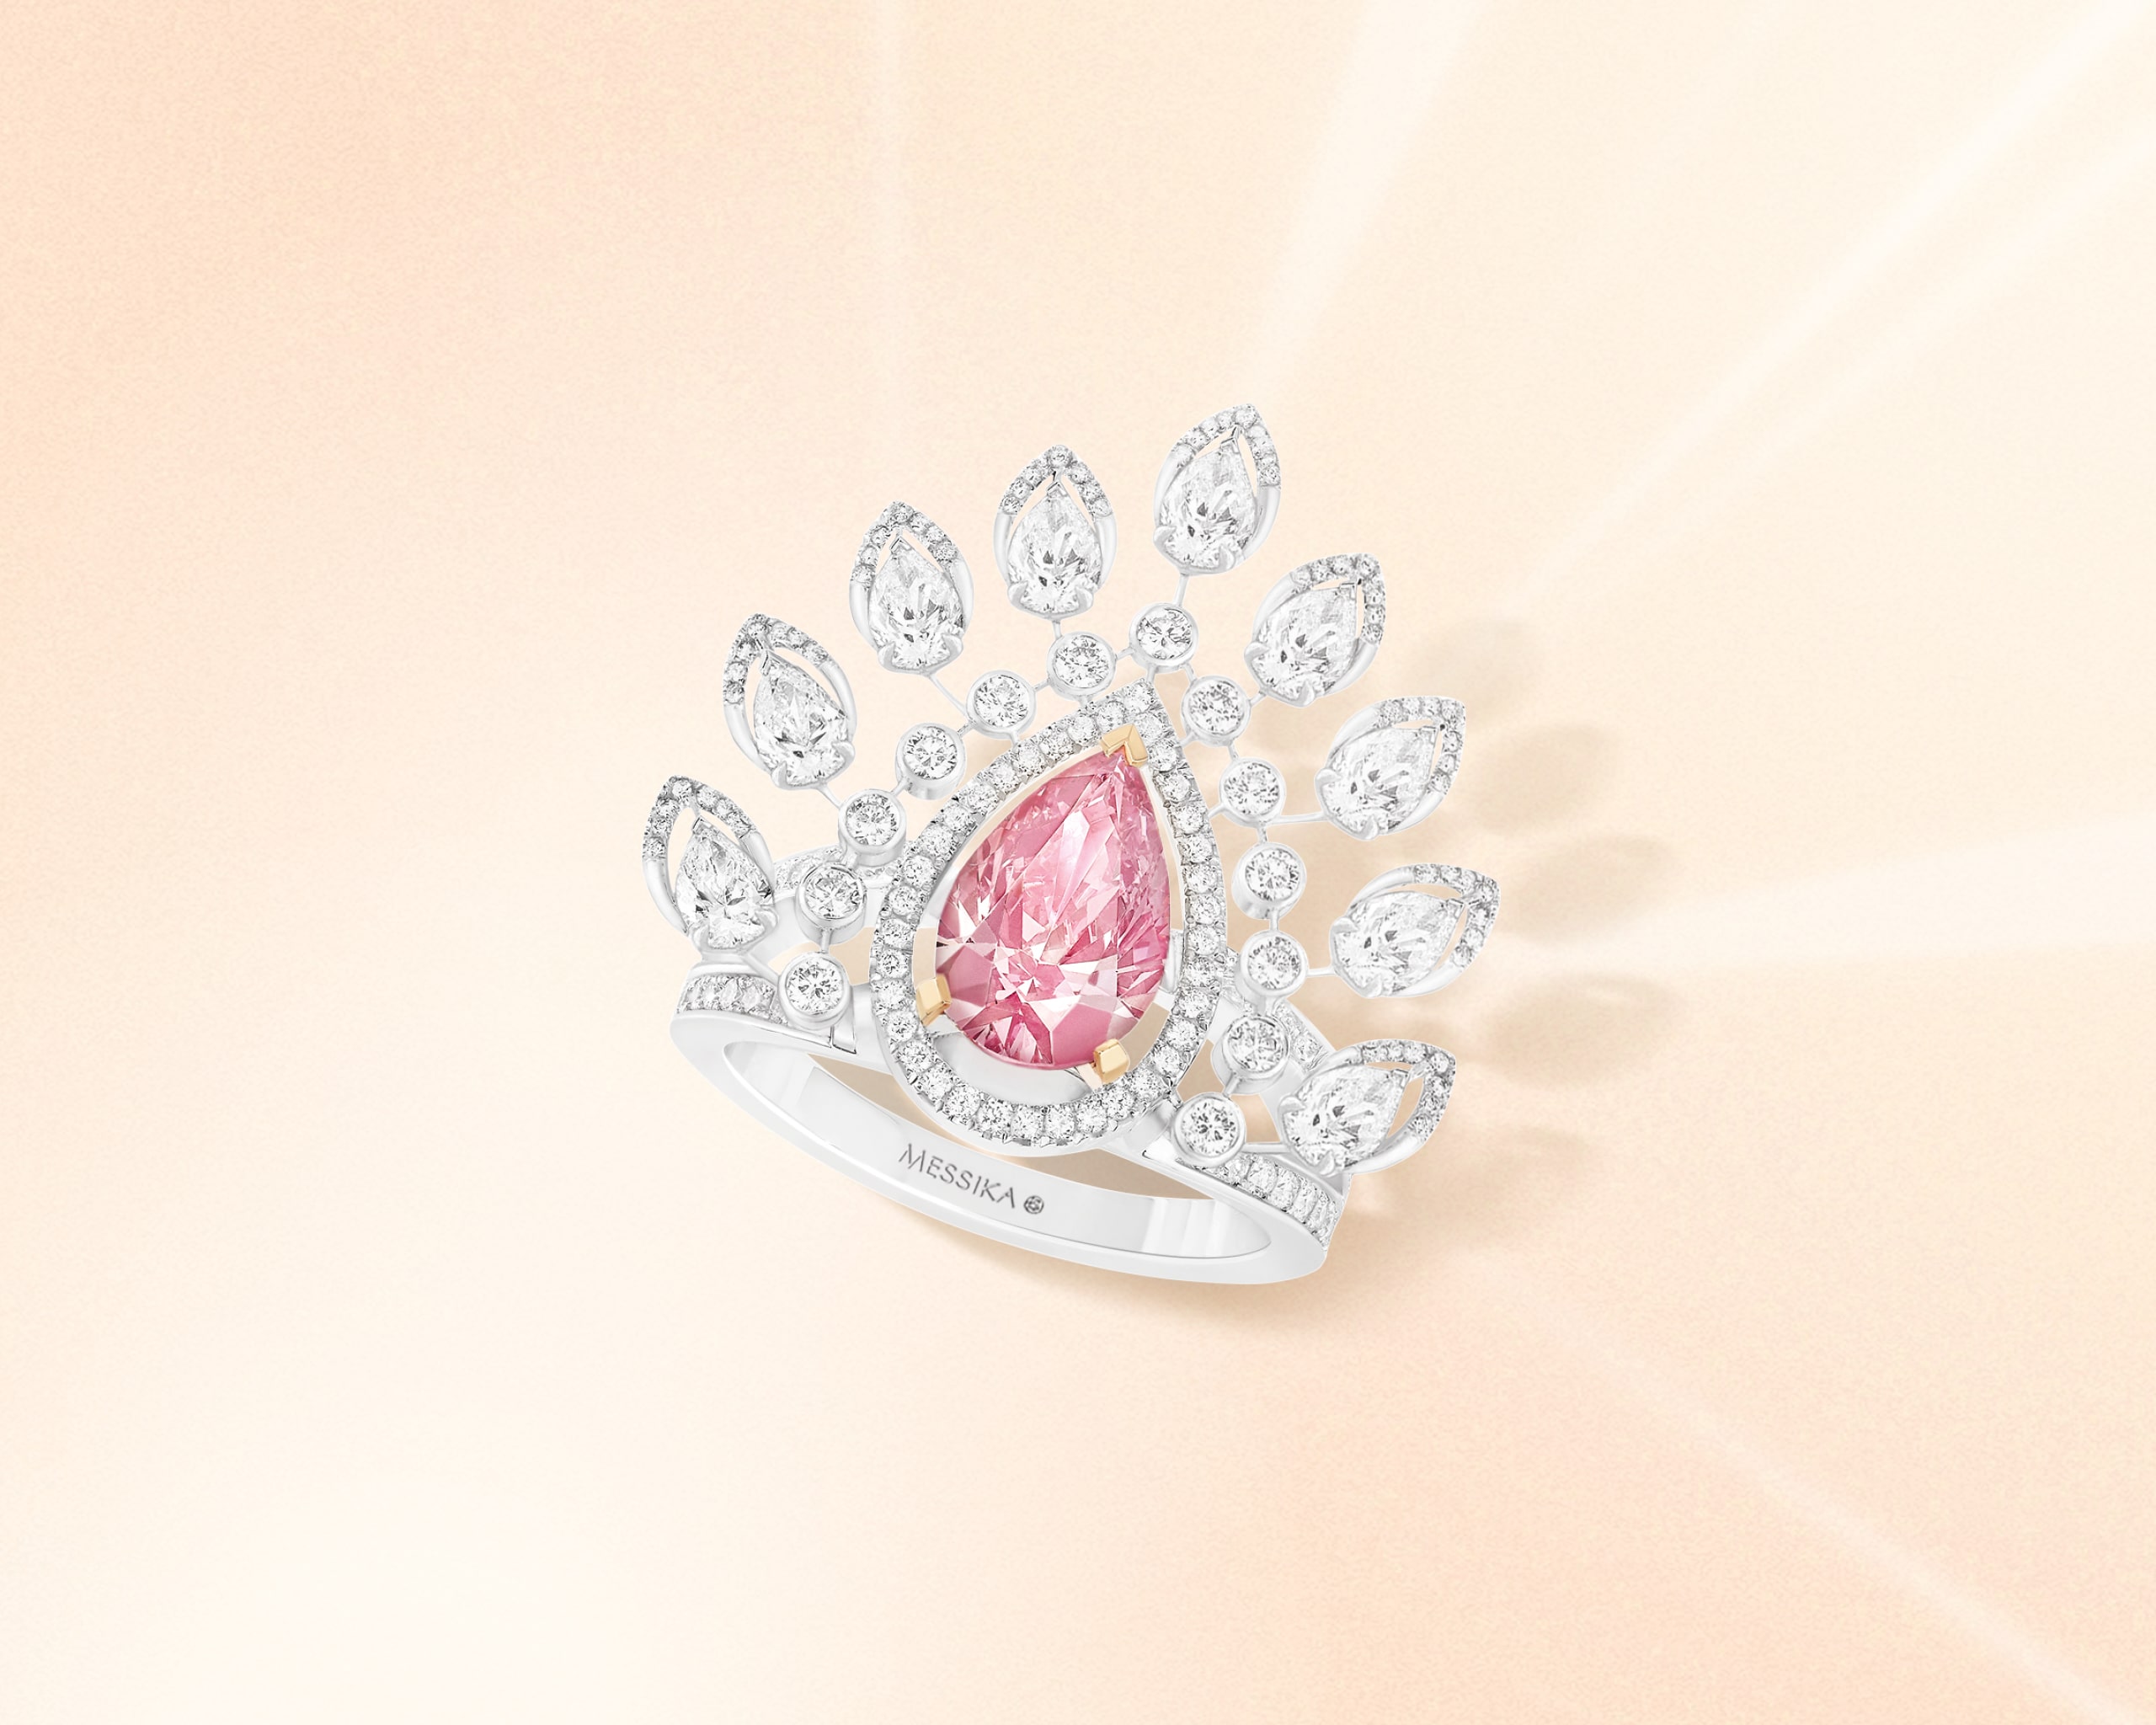 Crown shaped marquise diamond ring with pink diamond centerpiece from Desert Bloom collection by Messika 